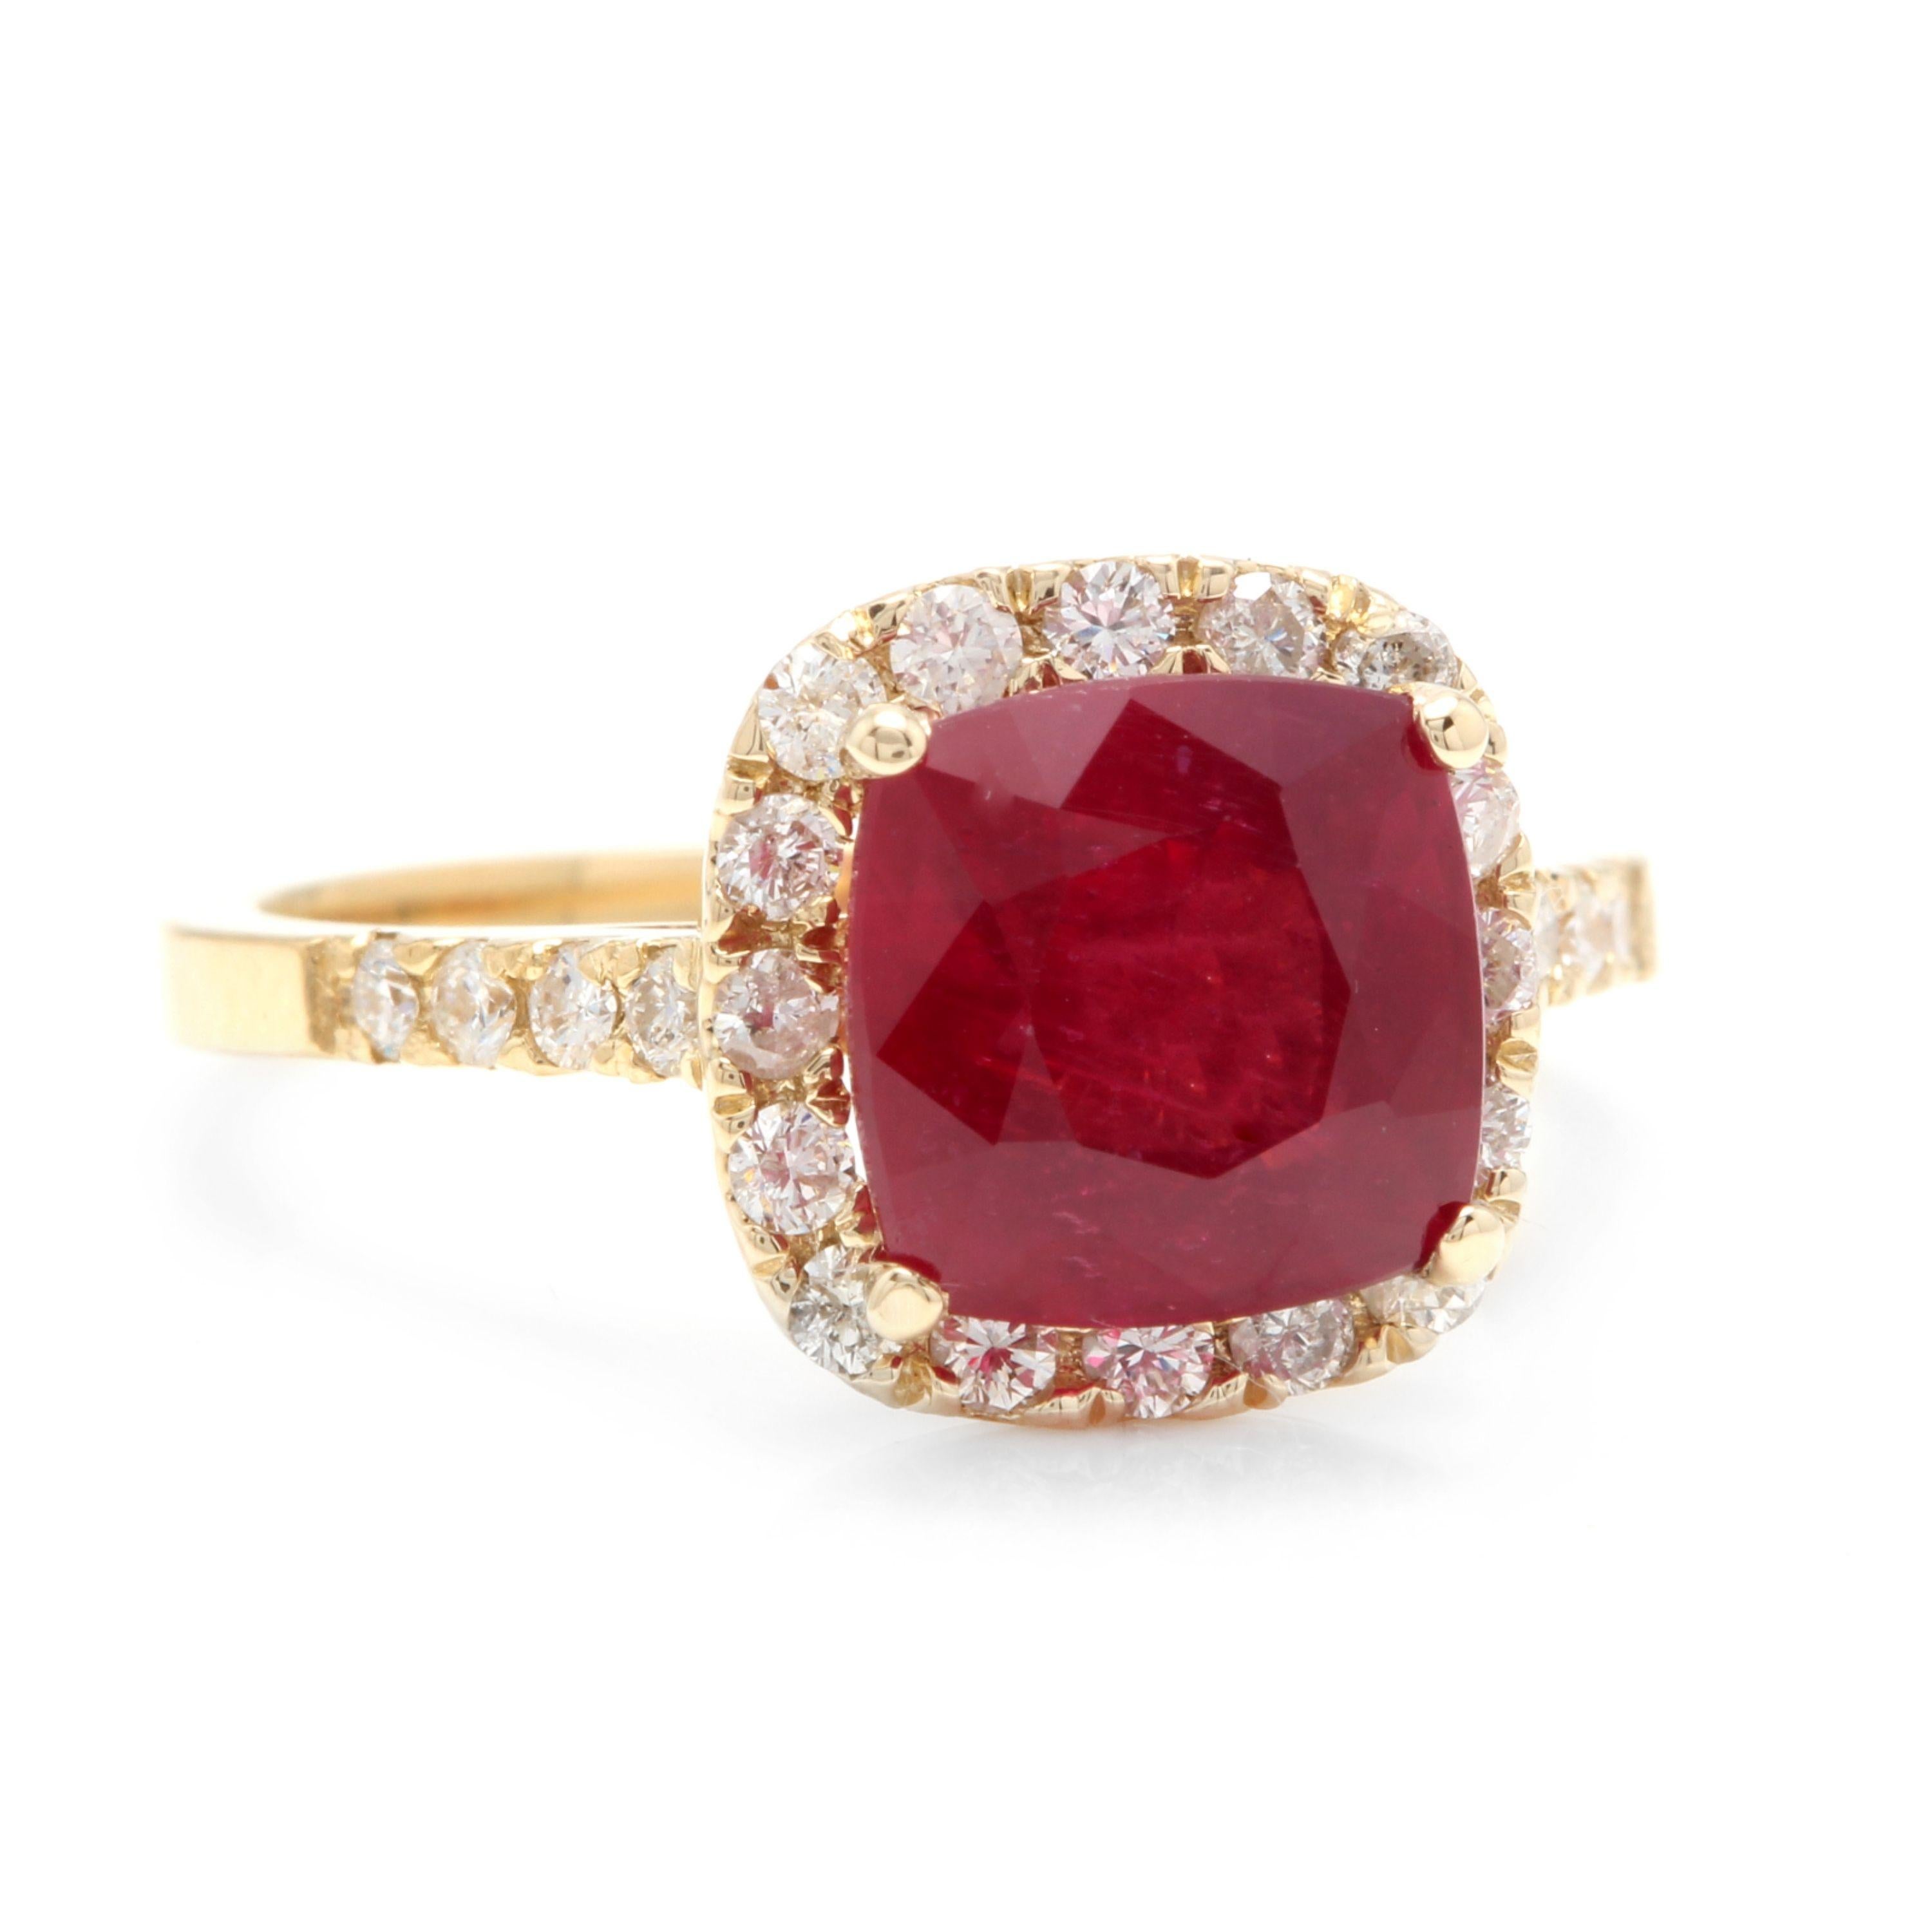 4.60 Carats Impressive Red Ruby and Natural Diamond 14K Yellow Gold Ring

Total Red Ruby Weight is Approx. 4.00 Carats

Ruby Treatment: Lead Glass Filling

Ruby Measures: Approx. 8.00 x 8.00mm

Natural Round Diamonds Weight: Approx. 0.60 Carats